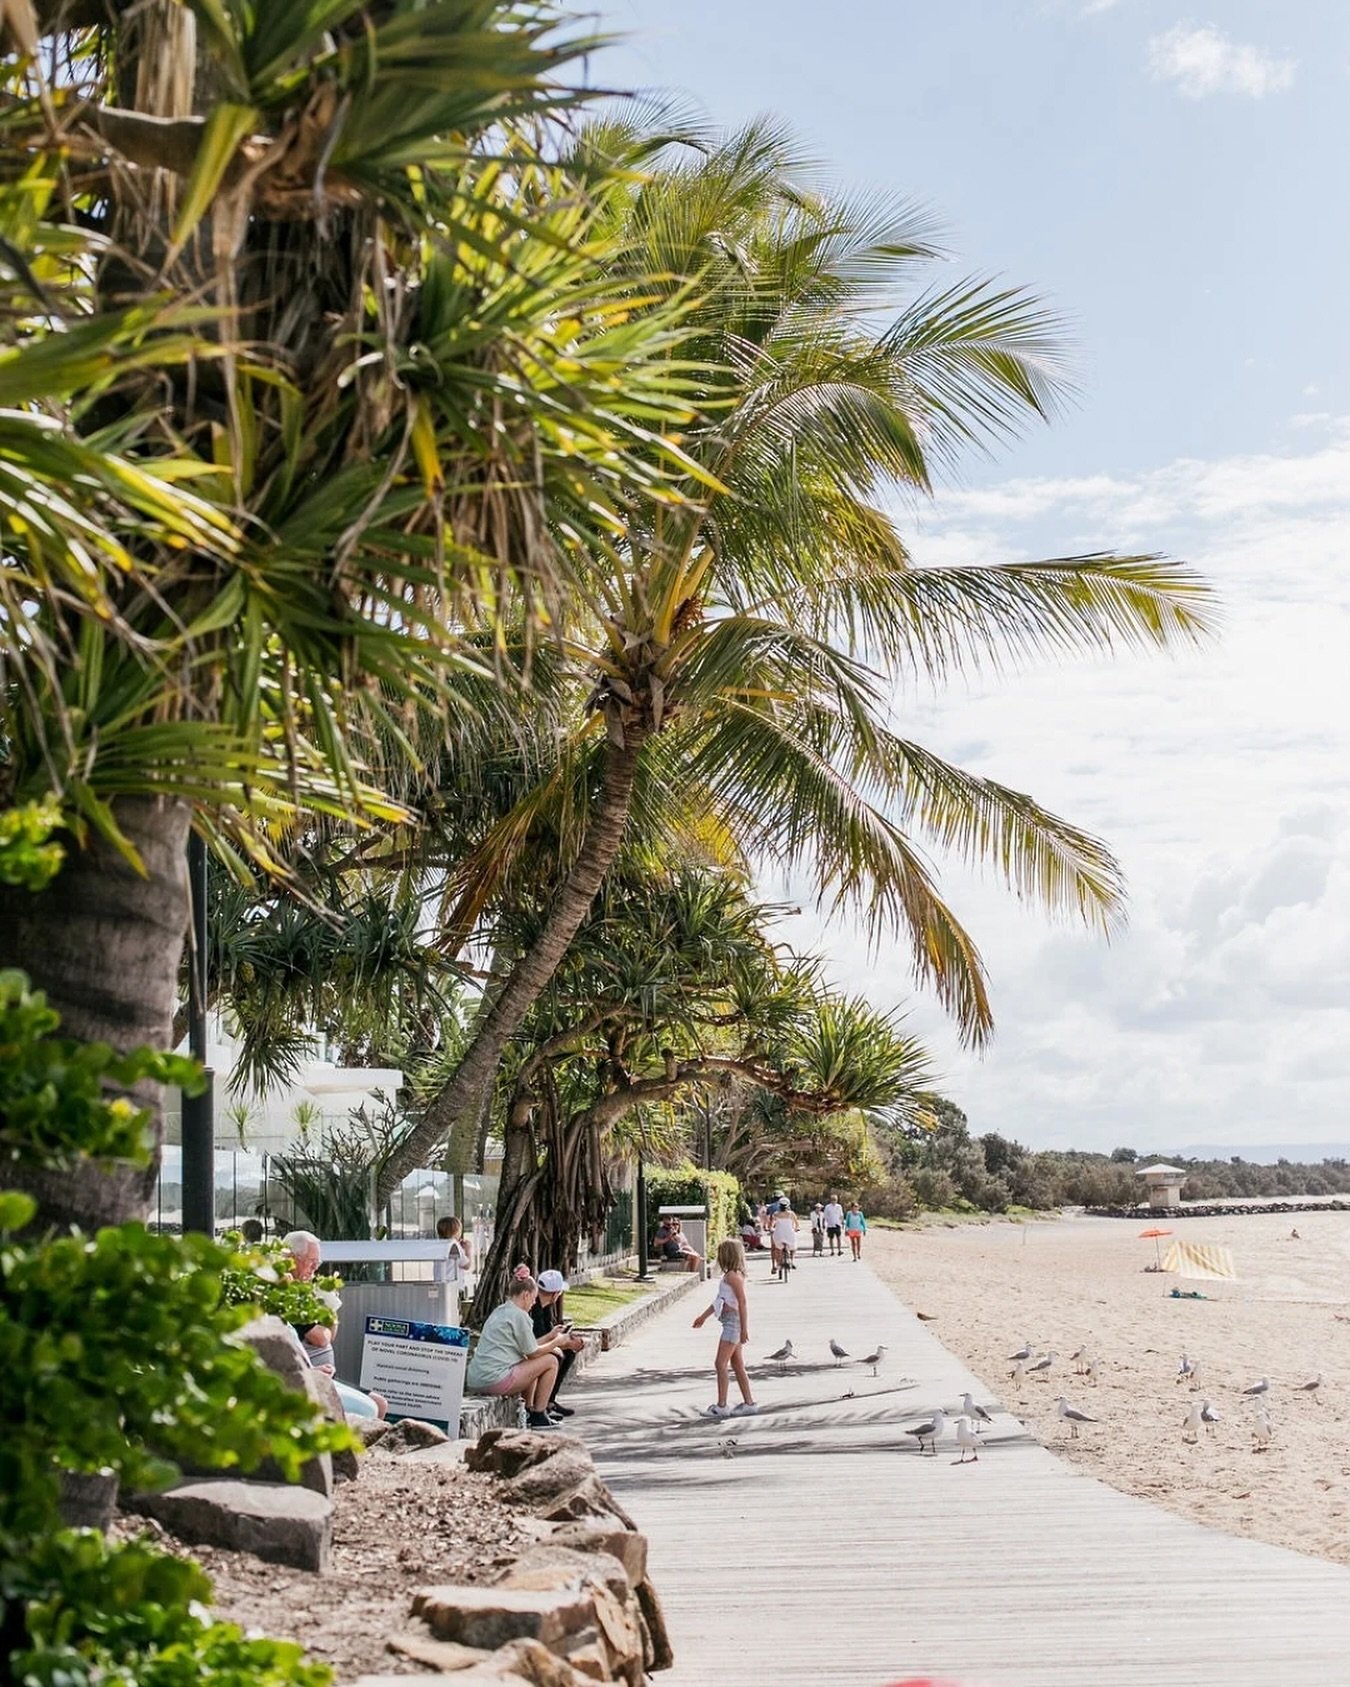 Find us nestled under the shade of the pandanus and palm trees, right on Noosa Main Beach.

Join us and experience a relaxed beachfront dining at its finest, from breakfast to dinner.
~ Bookings via link in our bio.

.
.
.

#beachfrontdining #relaxed